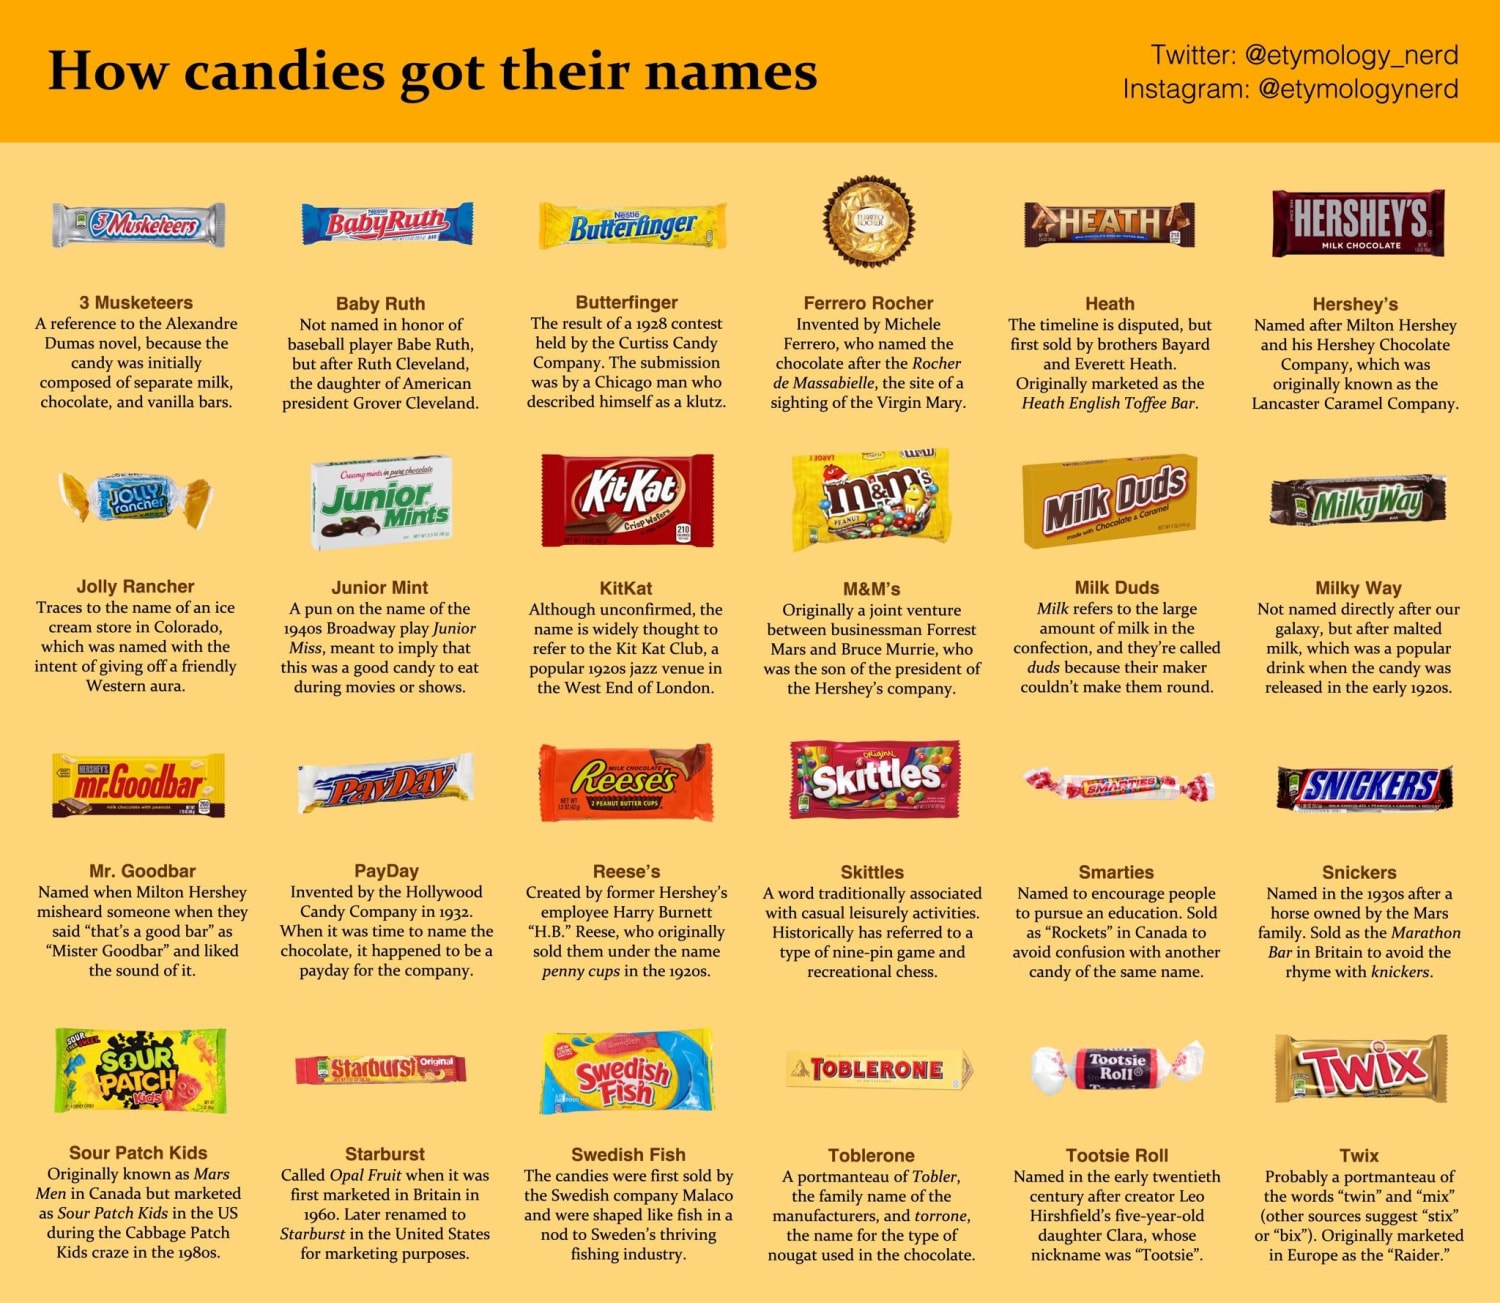 This is How Candies got their names